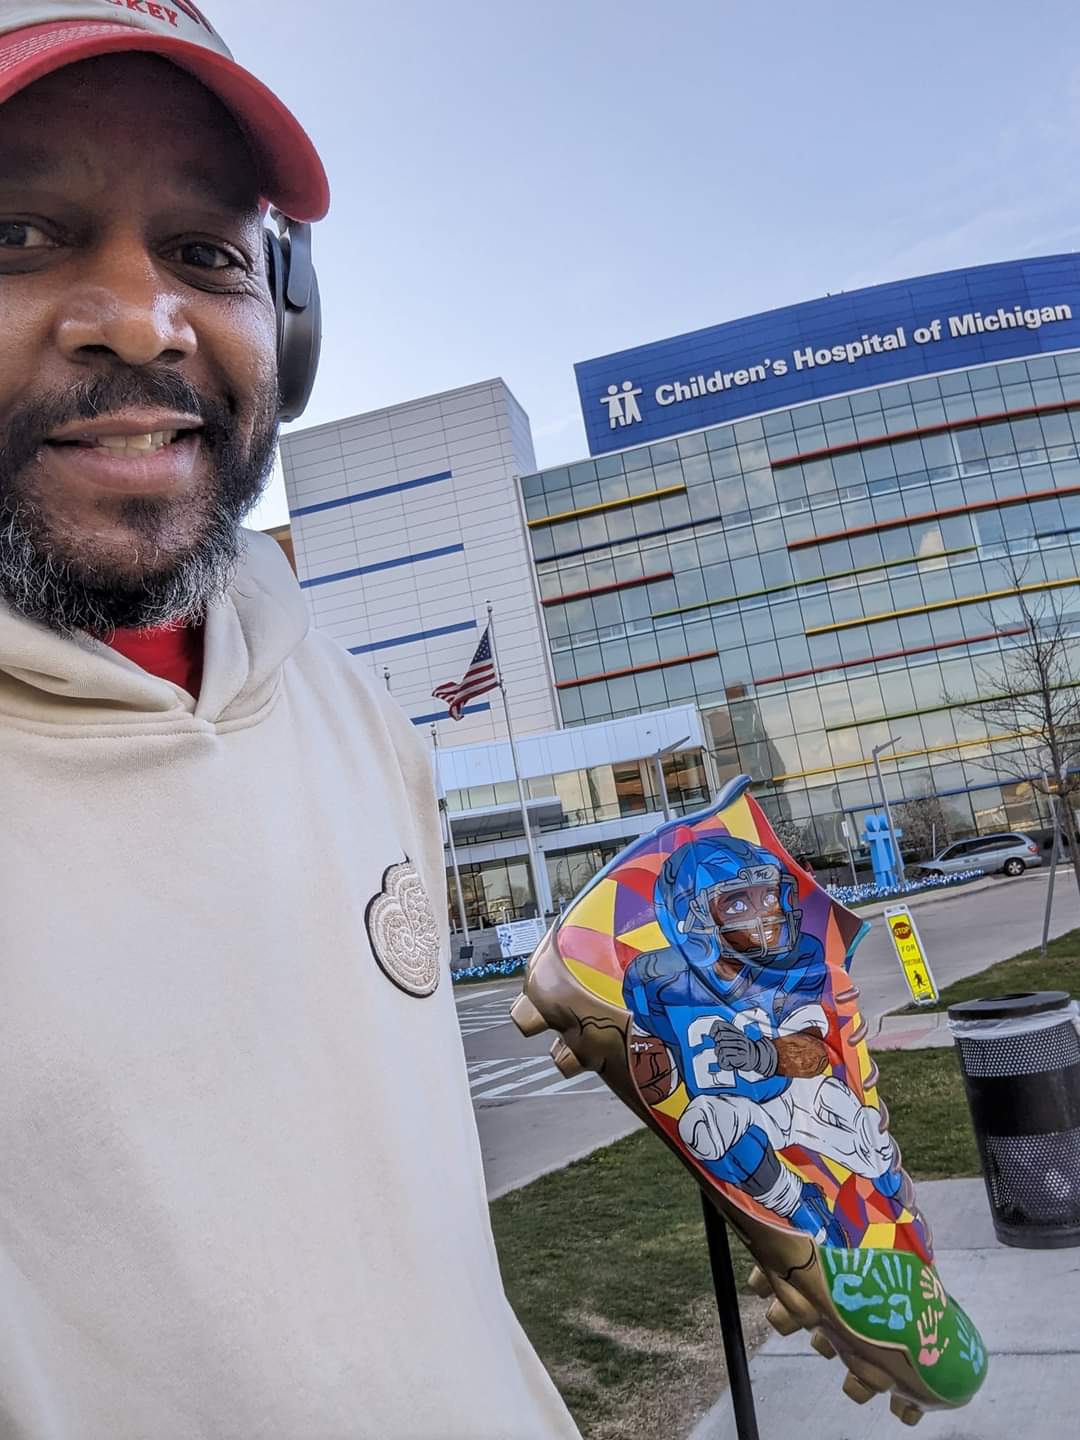 During his mission to visit all 20 sites comprising the DCLEATED exhibit, Detroiter Ed Cliett made stops across Detroit and beyond, including Children's Hospital of Michigan, where the artwork was created by Trae Isaac.